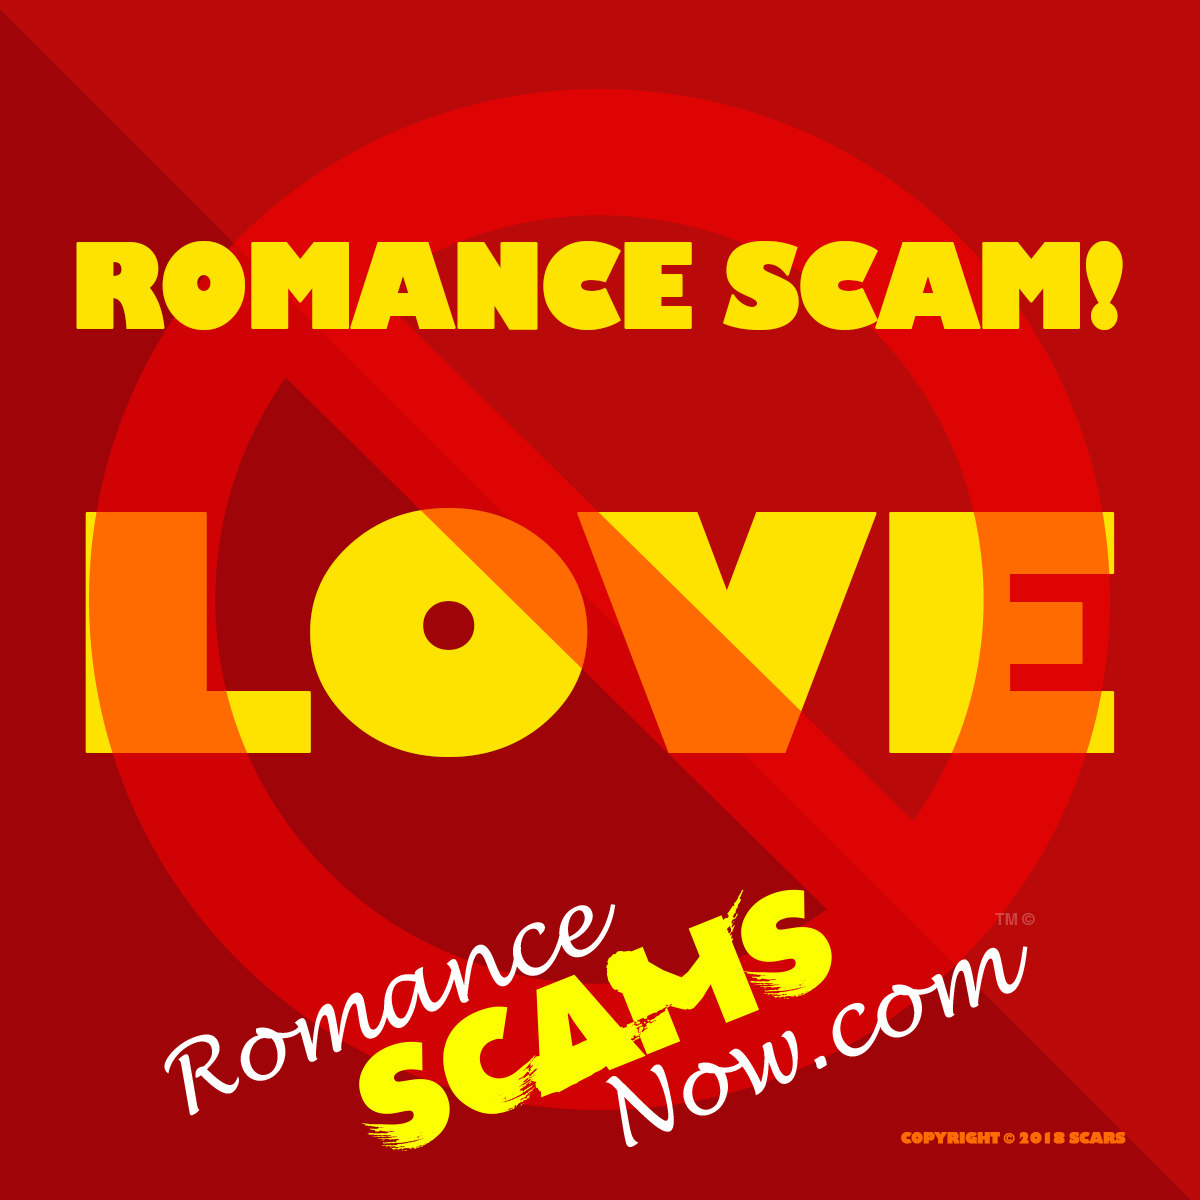 SCARS ™ / RSN™ Anti-Scam Poster 194